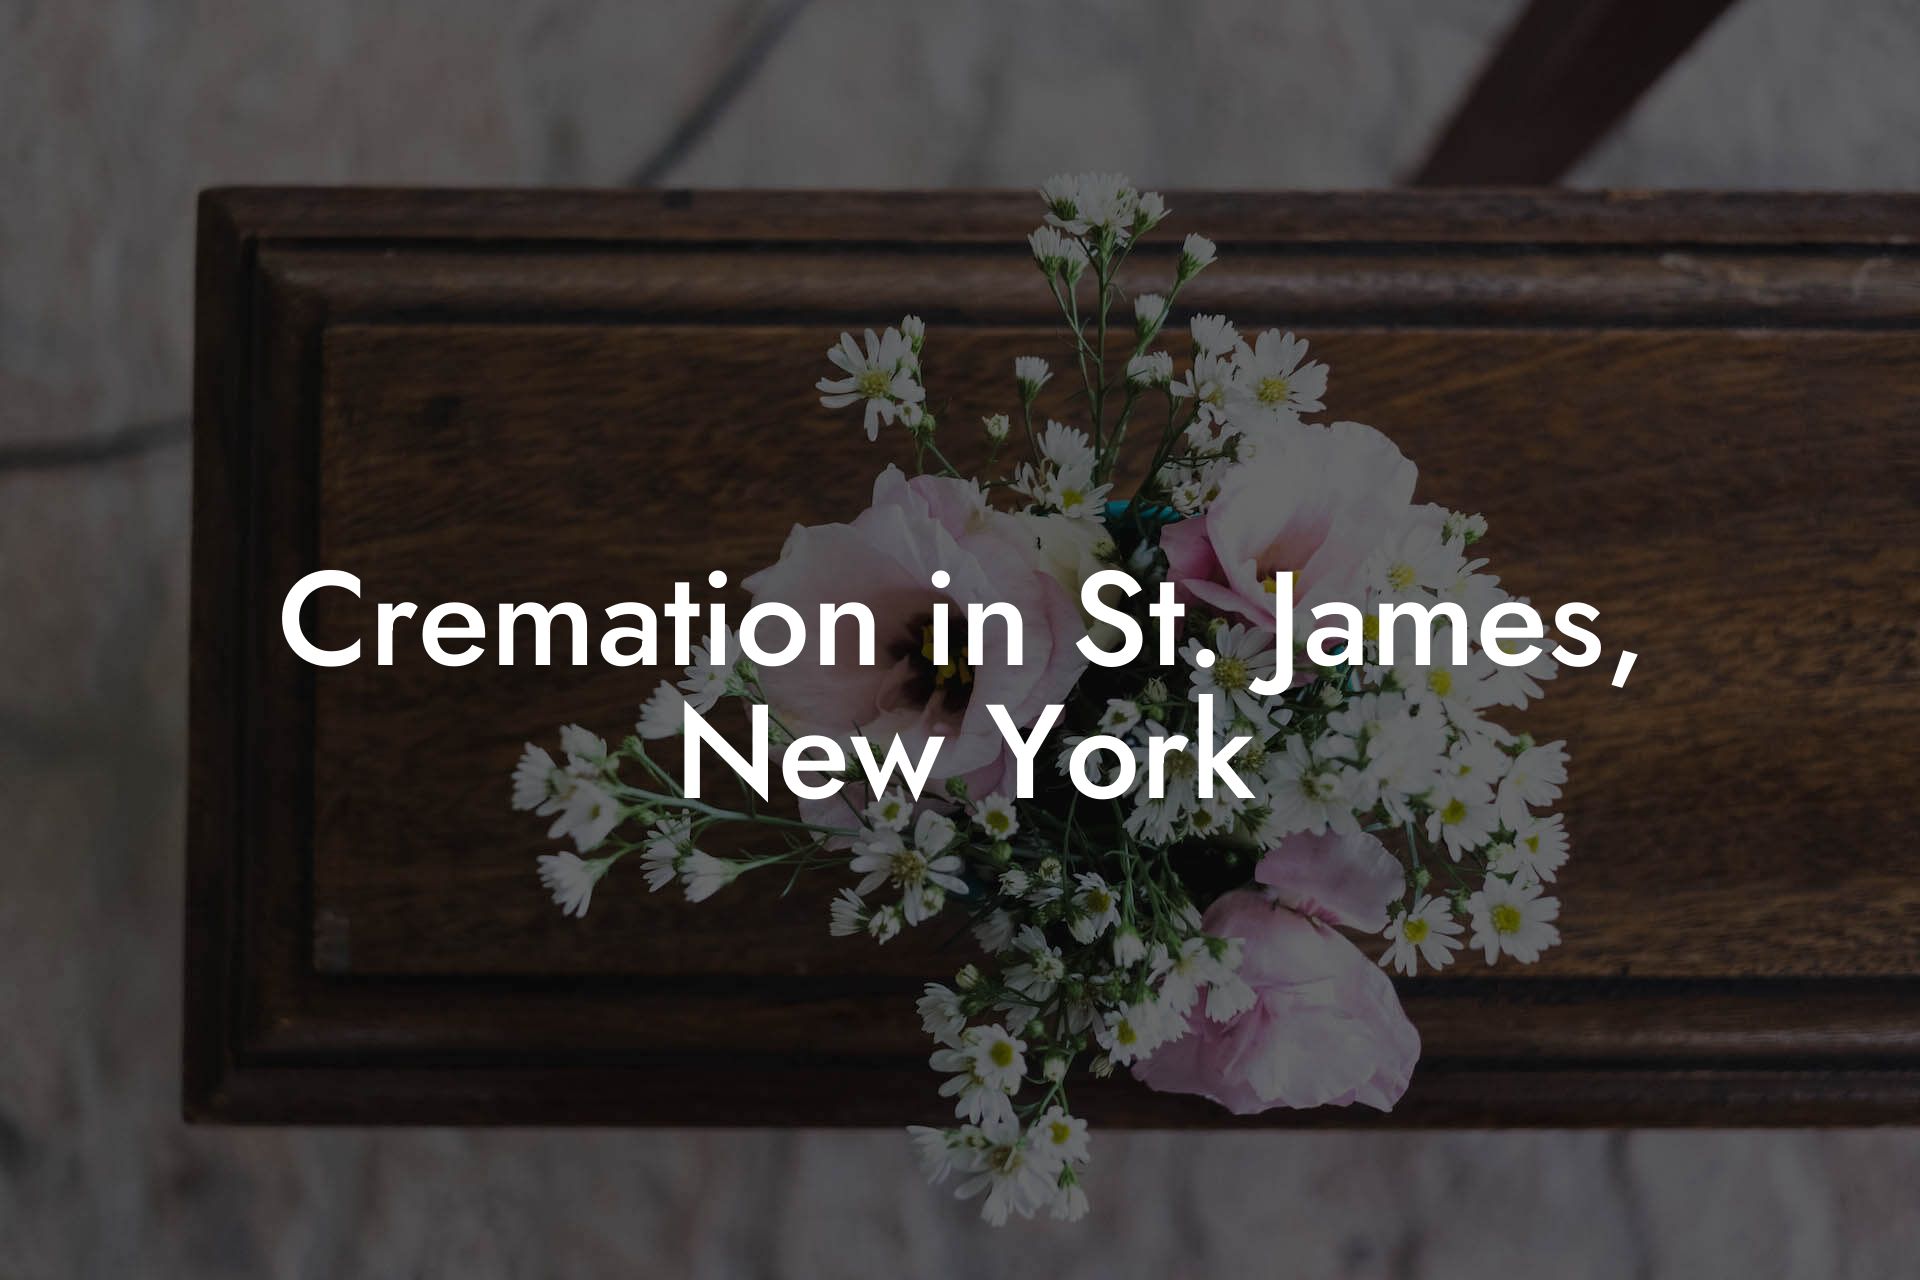 Cremation in St. James, New York